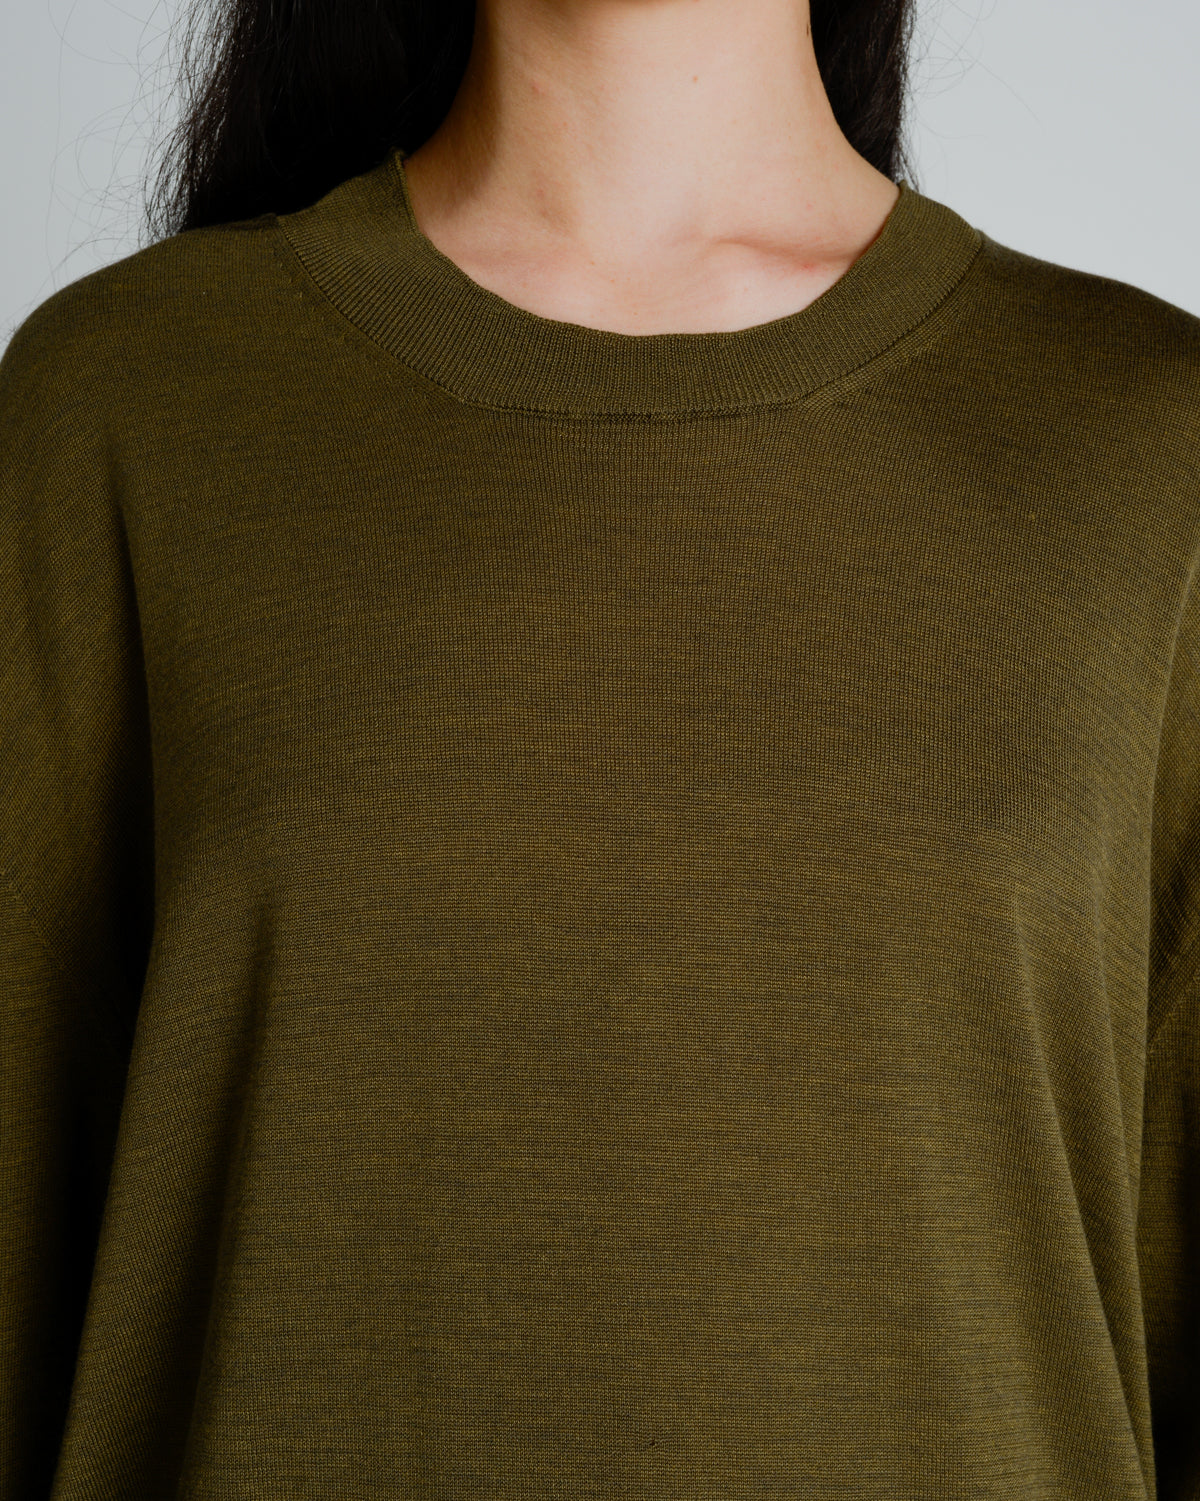 Green and Black Longsleeve Knit Top